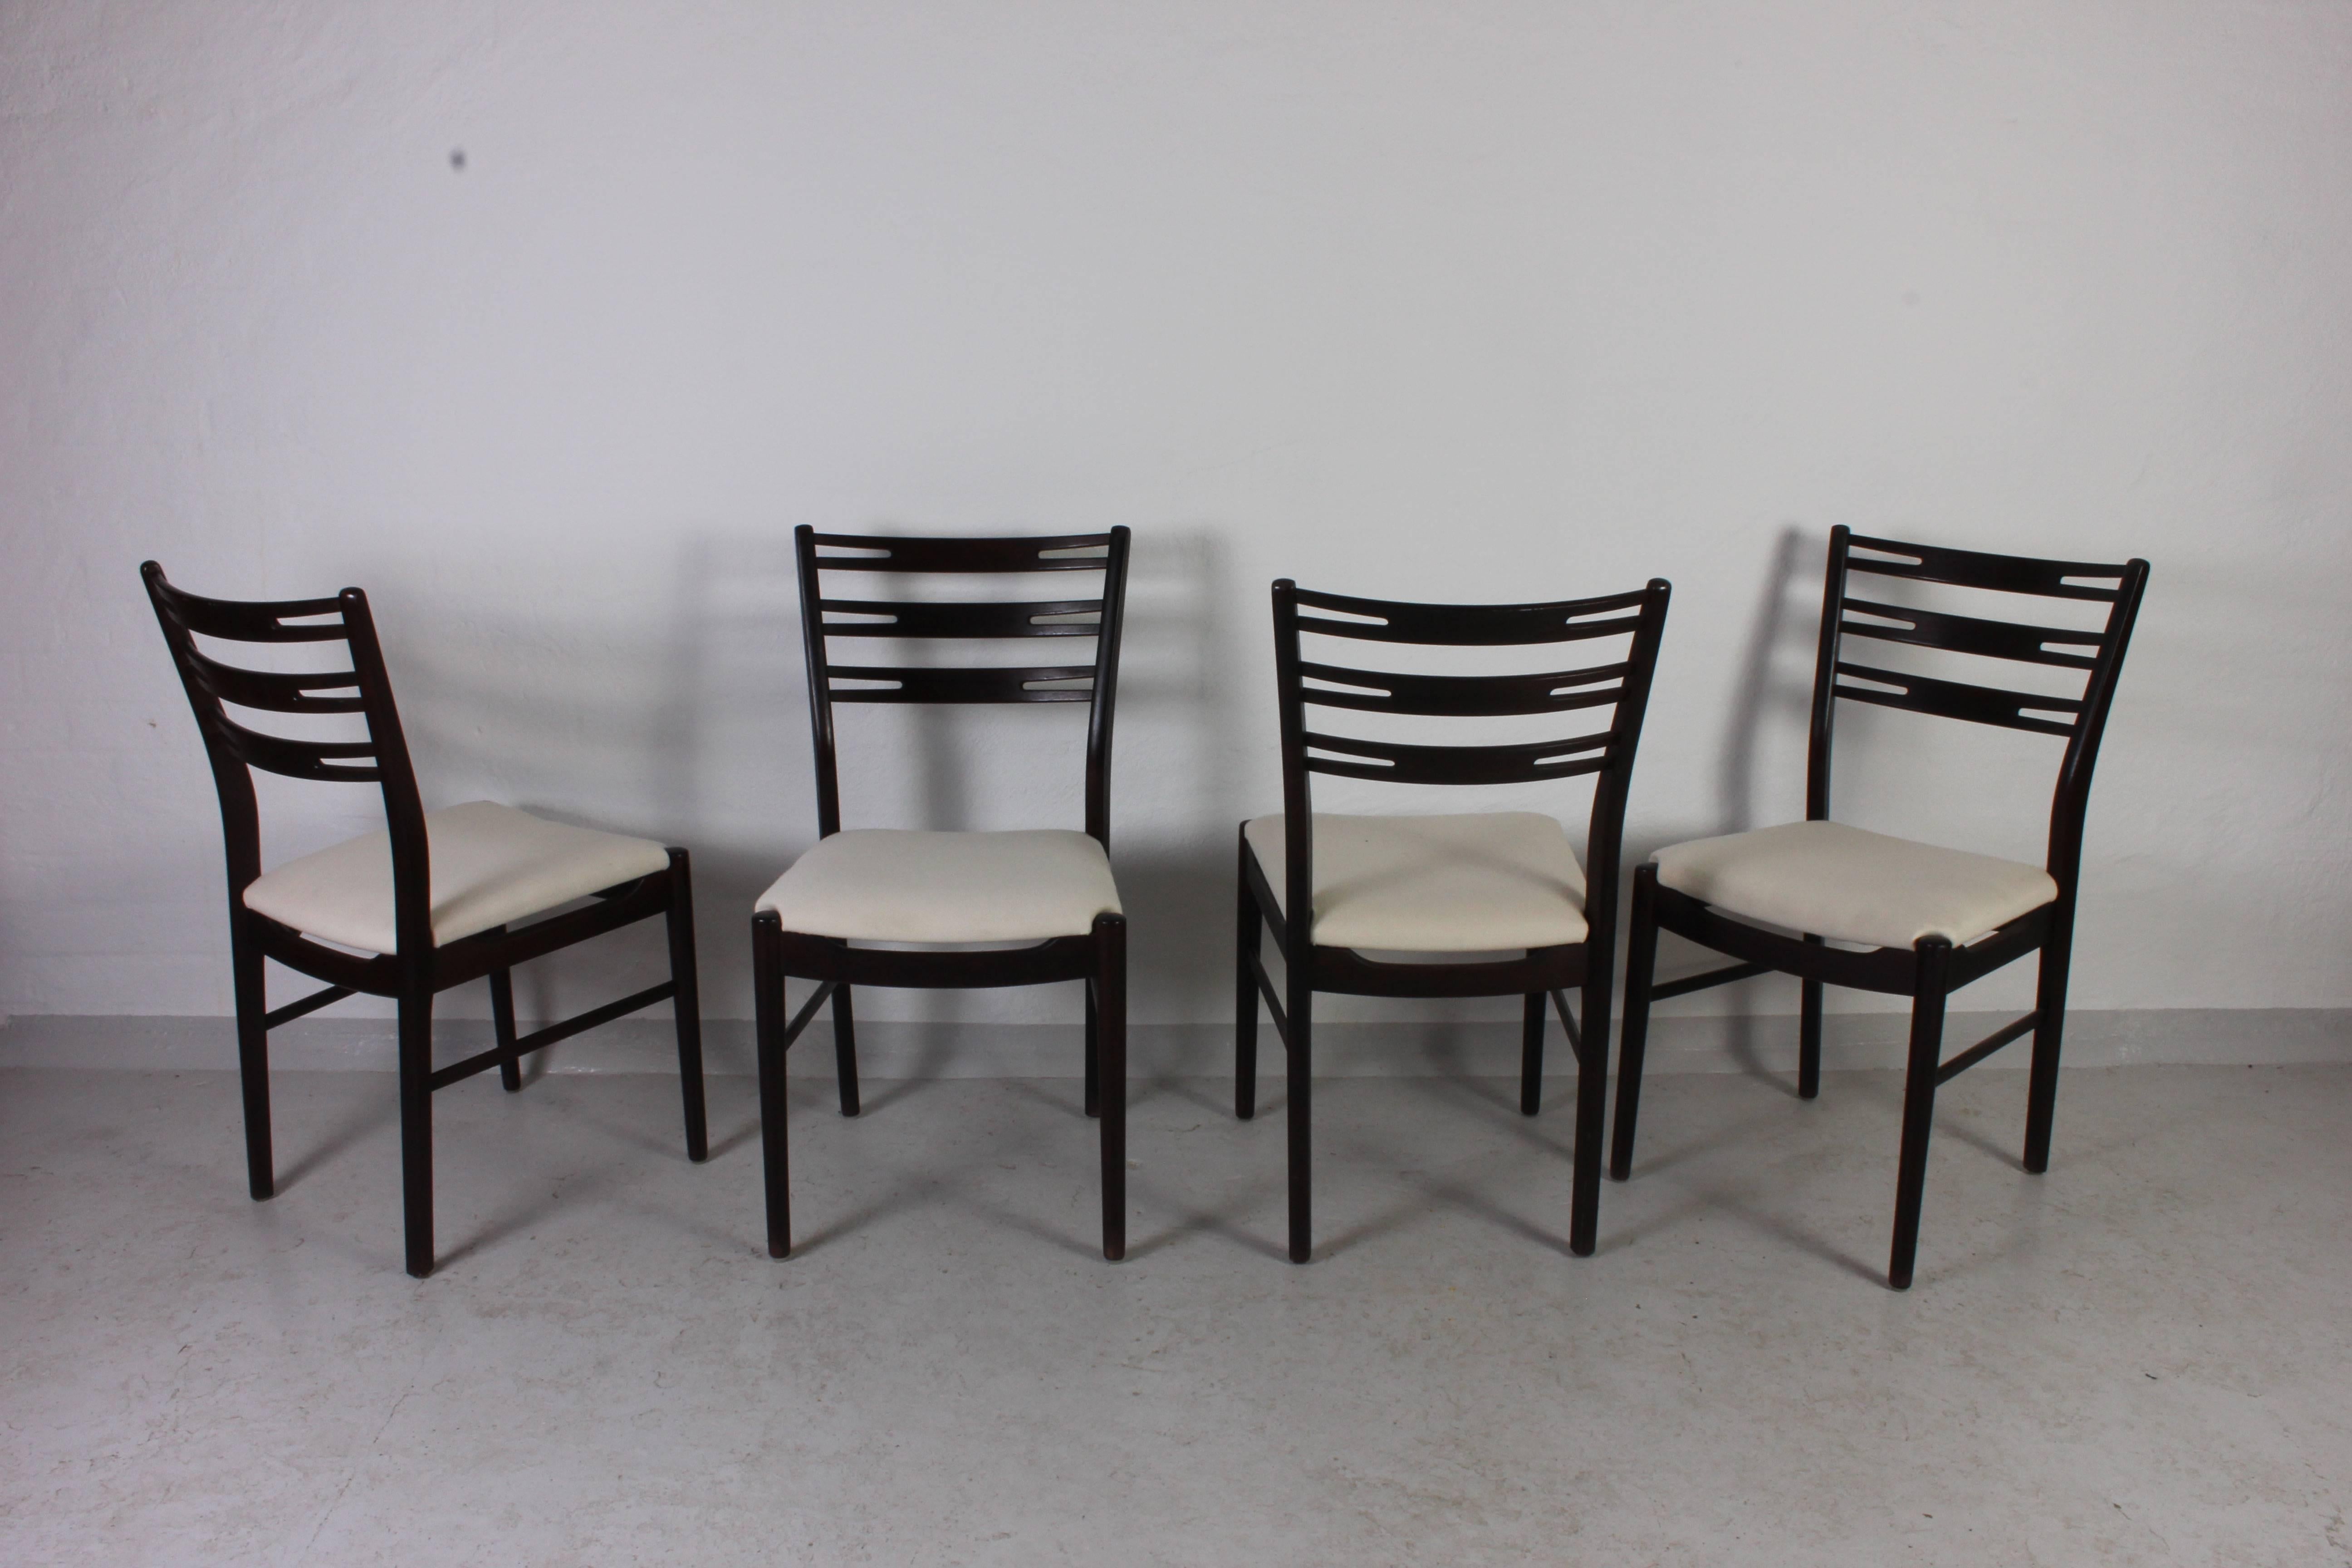 Set of four midcentury dining chairs by Danish manufacturer Sibast Møbler. The chairs are made of dark stained beech and new upholstery. The high back makes them very comfortable to sit in.